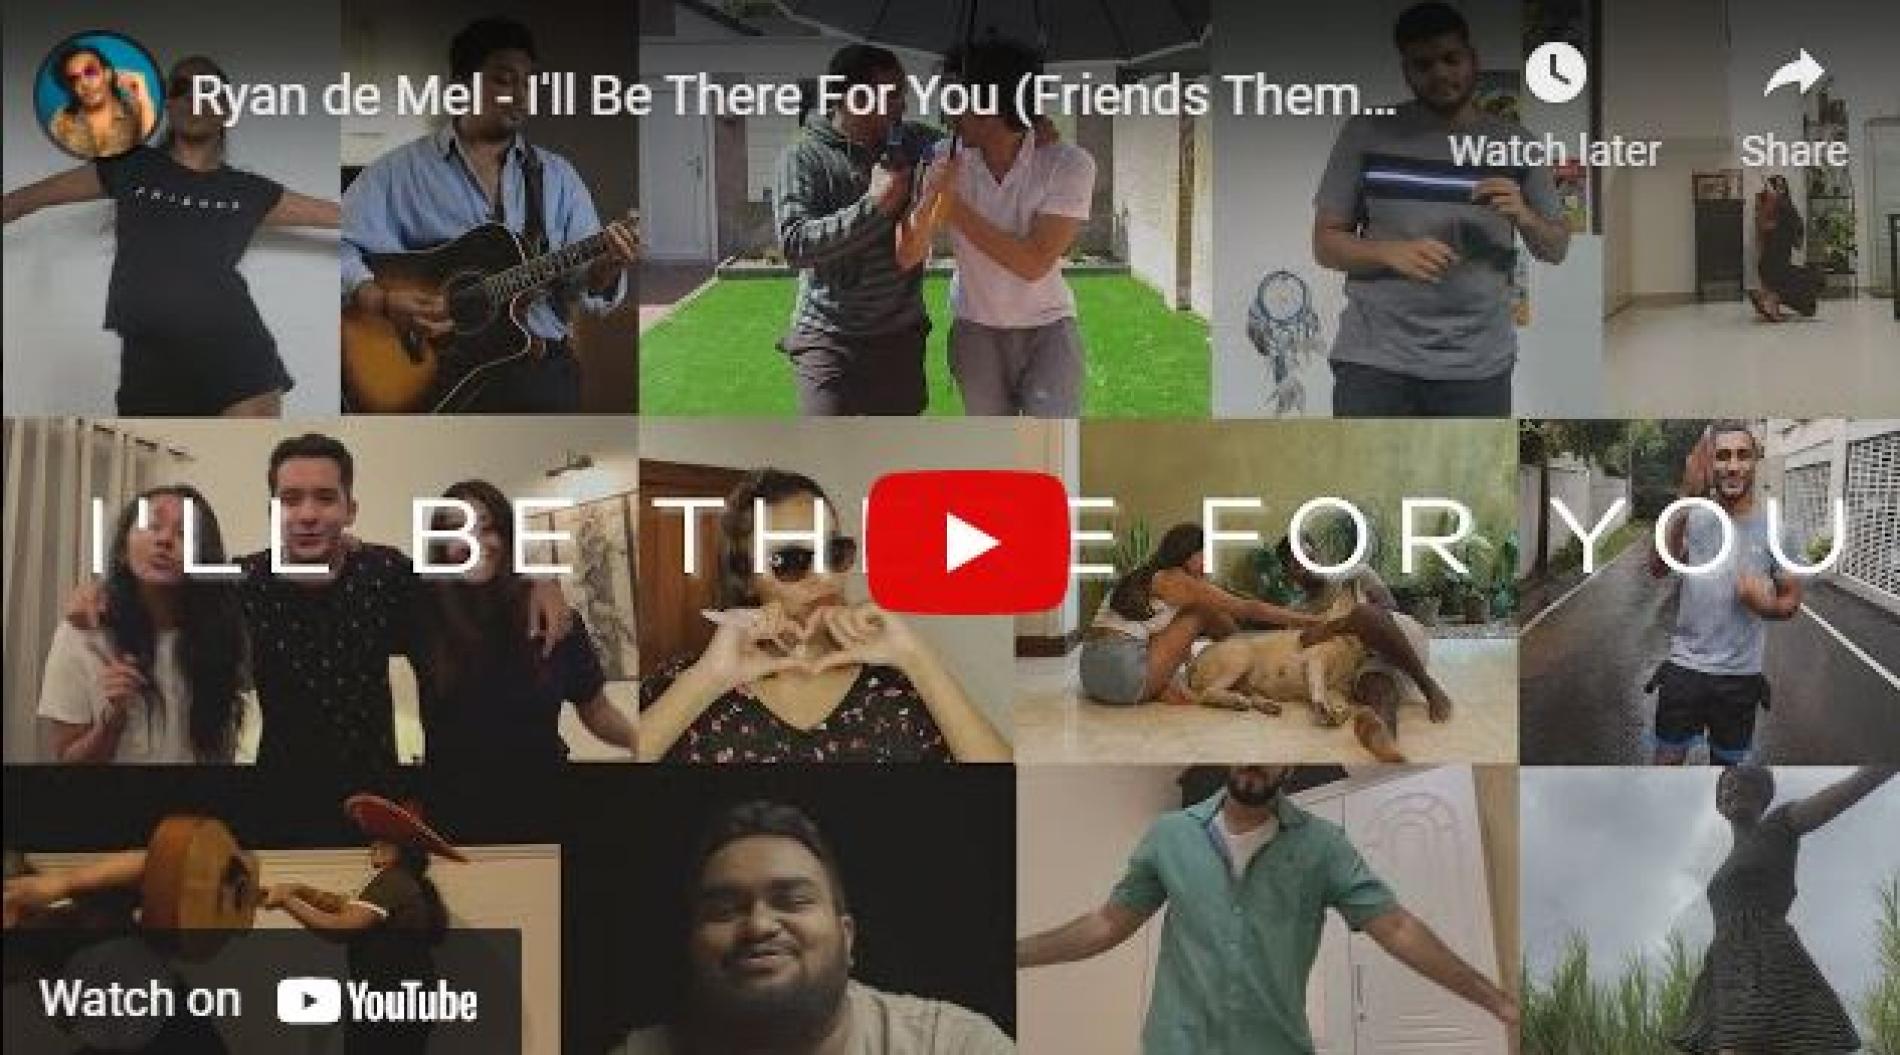 New Music : Ryan de Mel – I’ll Be There For You (Friends Theme Song) [Friends Reunion Tribute Cover]